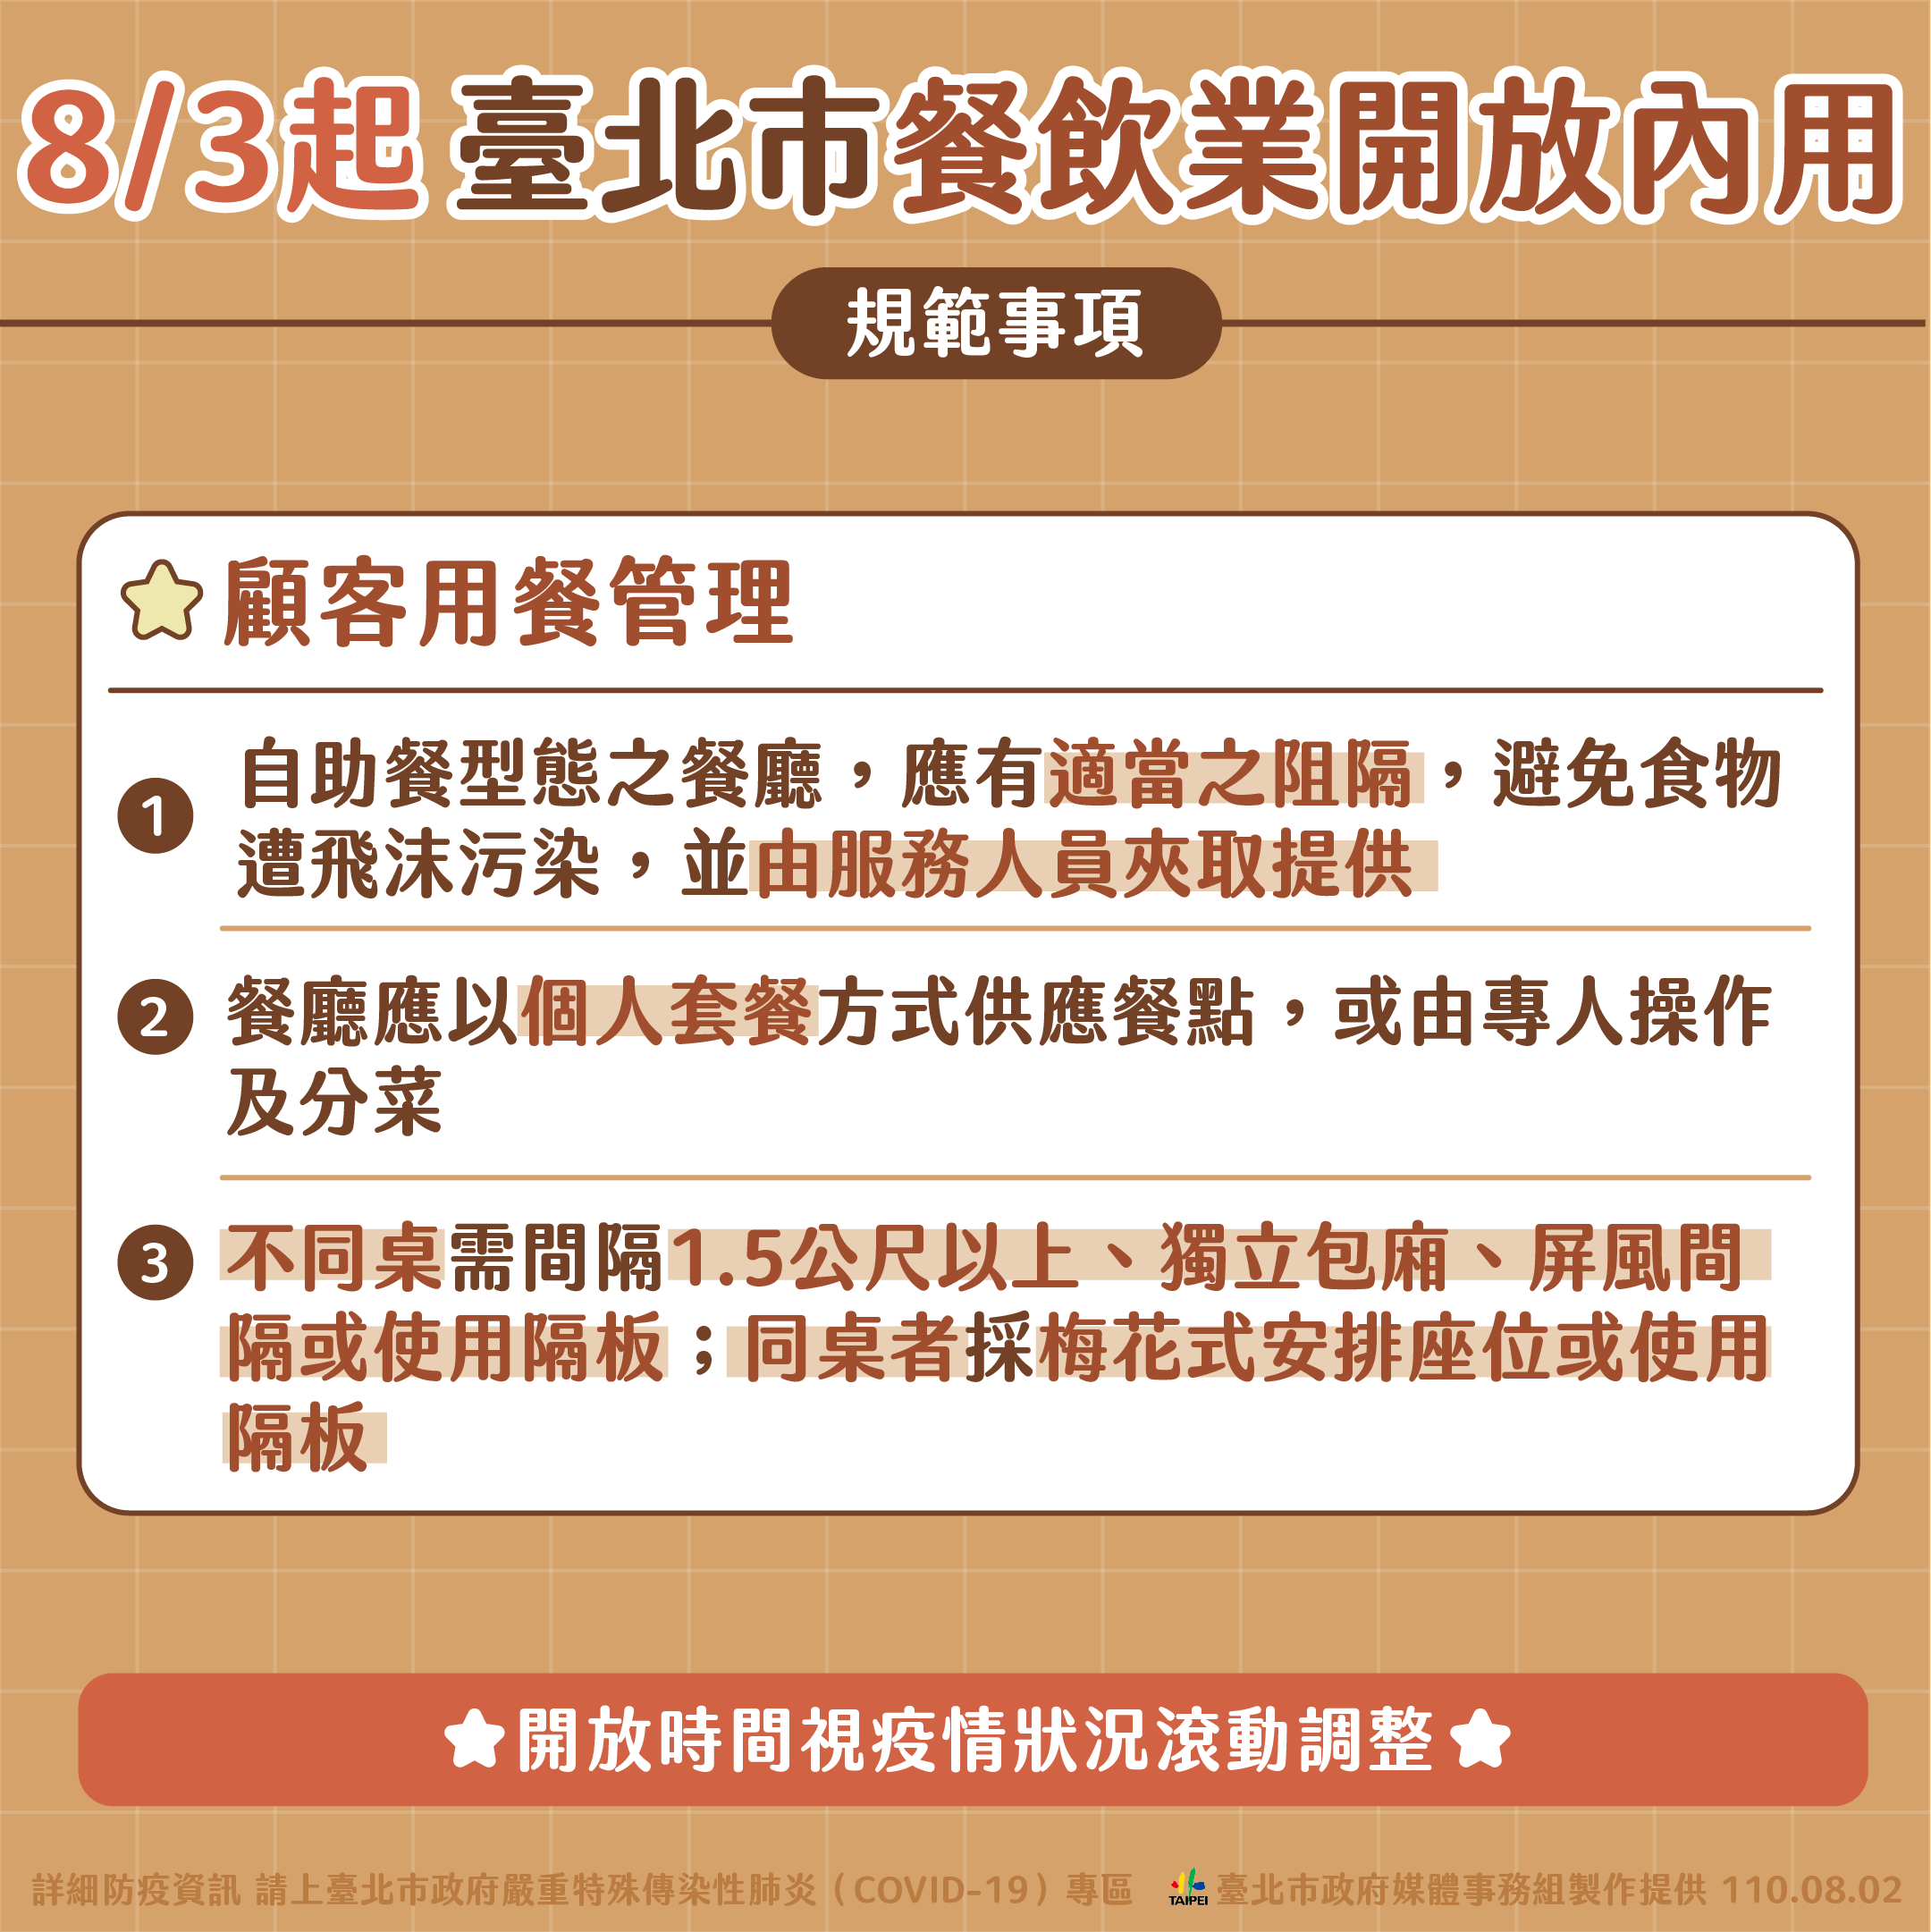 The internal guidelines were released, and the maximum penalty for violations is NT$15,000. Photo/Provided by Taipei City Government